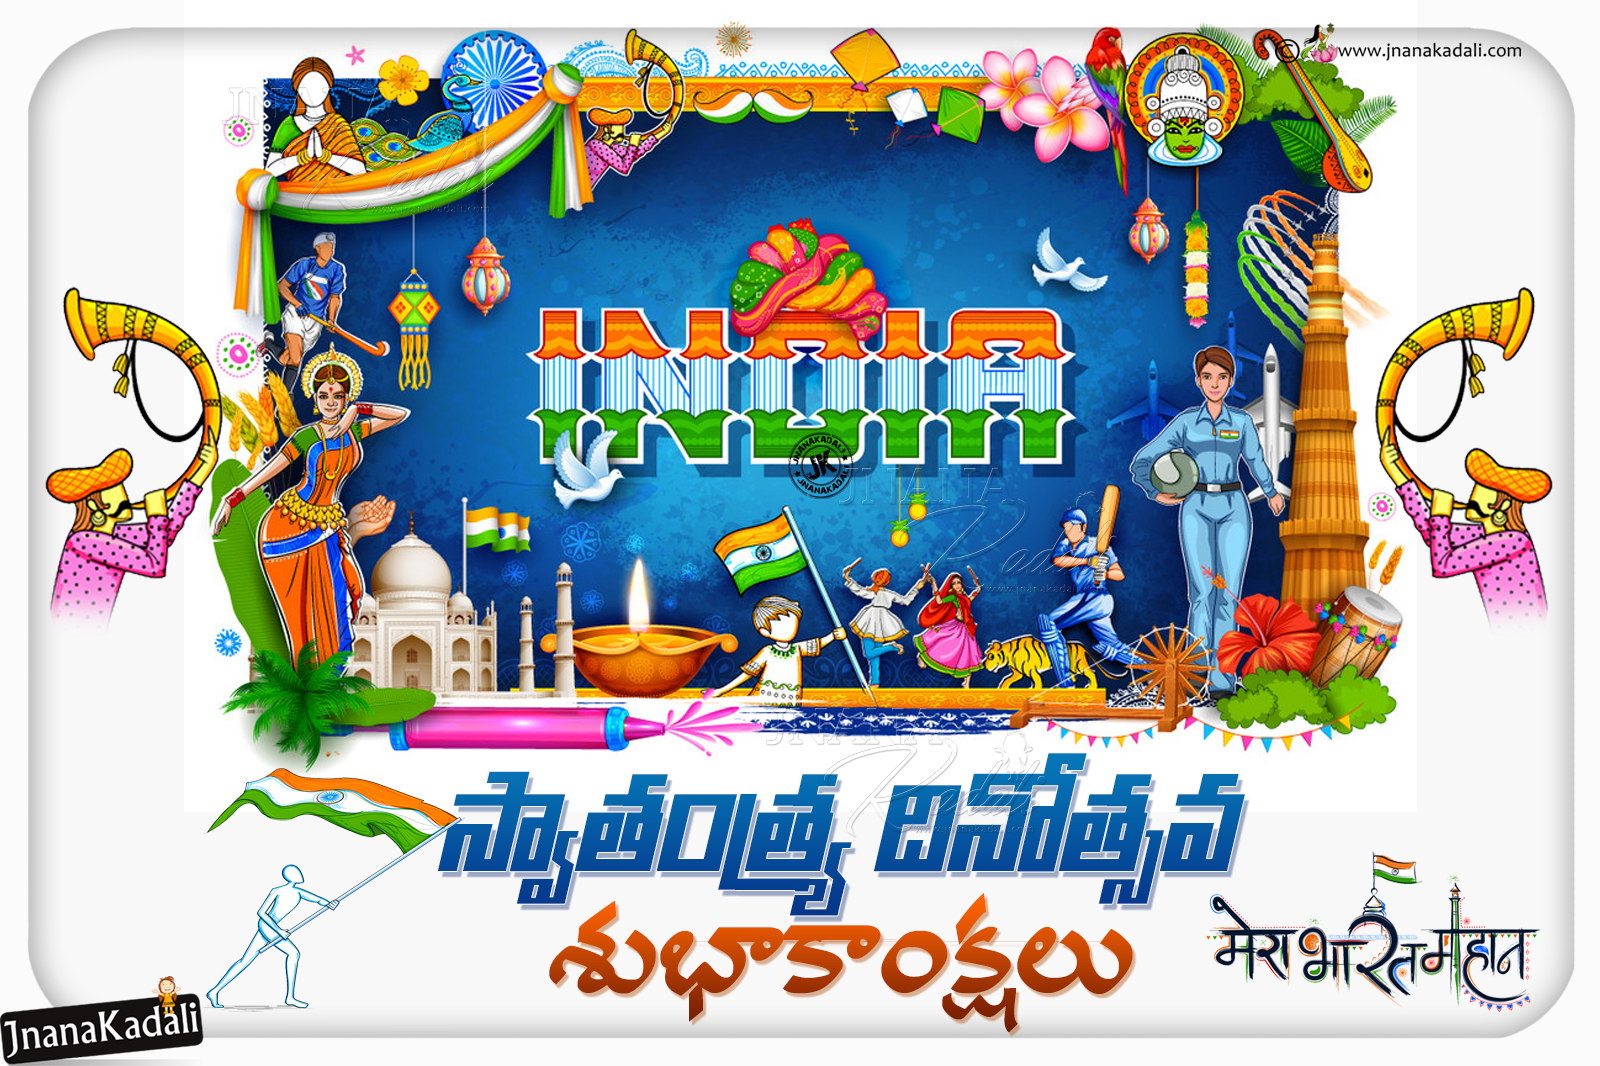 Advanced Happy Independence Day Greetings in Telugu with 4K Ultra HD wallpaper Free download. JNANA KADALI.COM. Telugu Quotes. English quotes. Hindi quotes. Tamil quotes. Dharmasandehalu